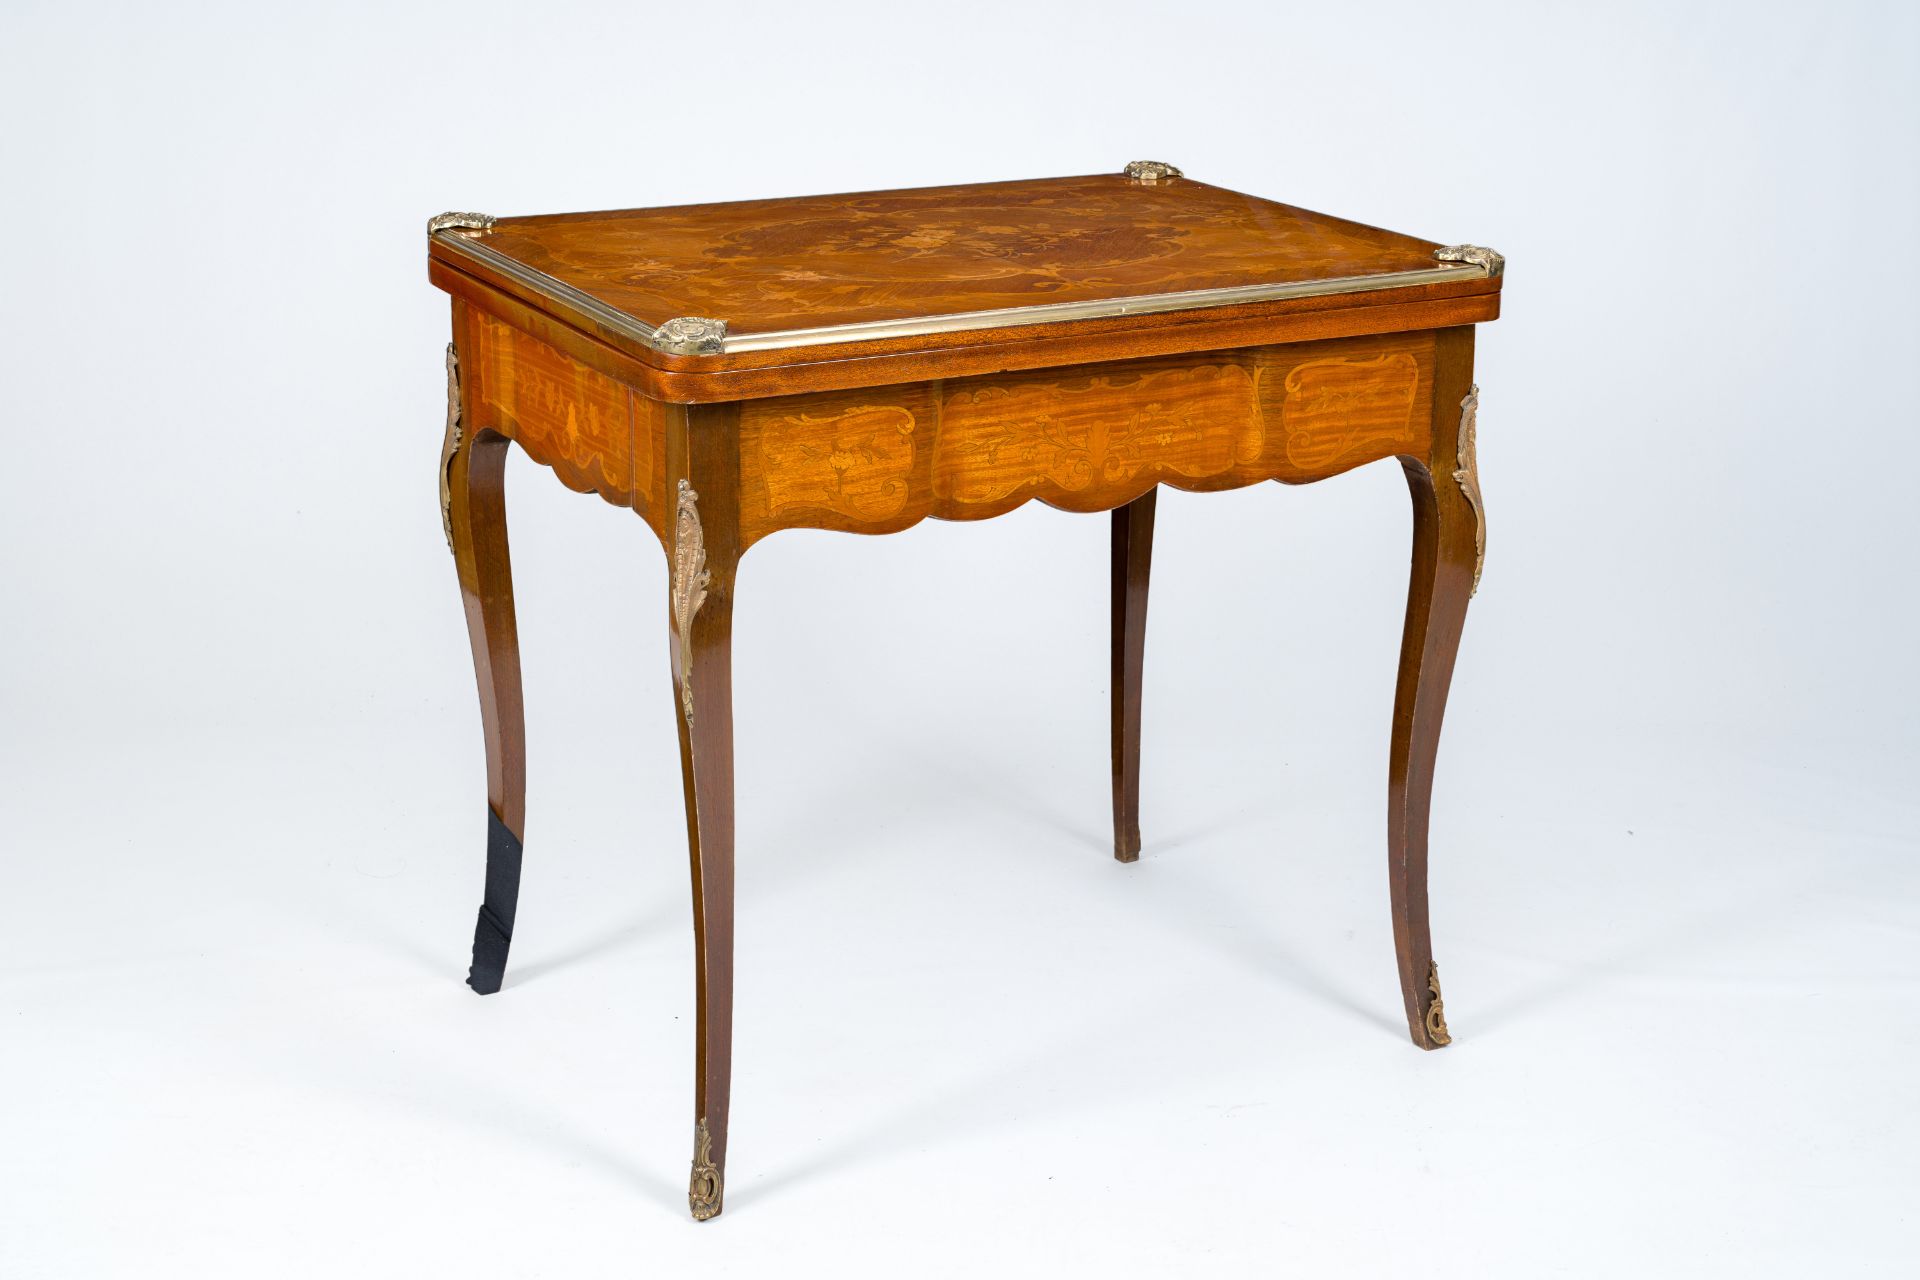 A French bronze mounted wood game table with marquetry top, 19th/20th C.